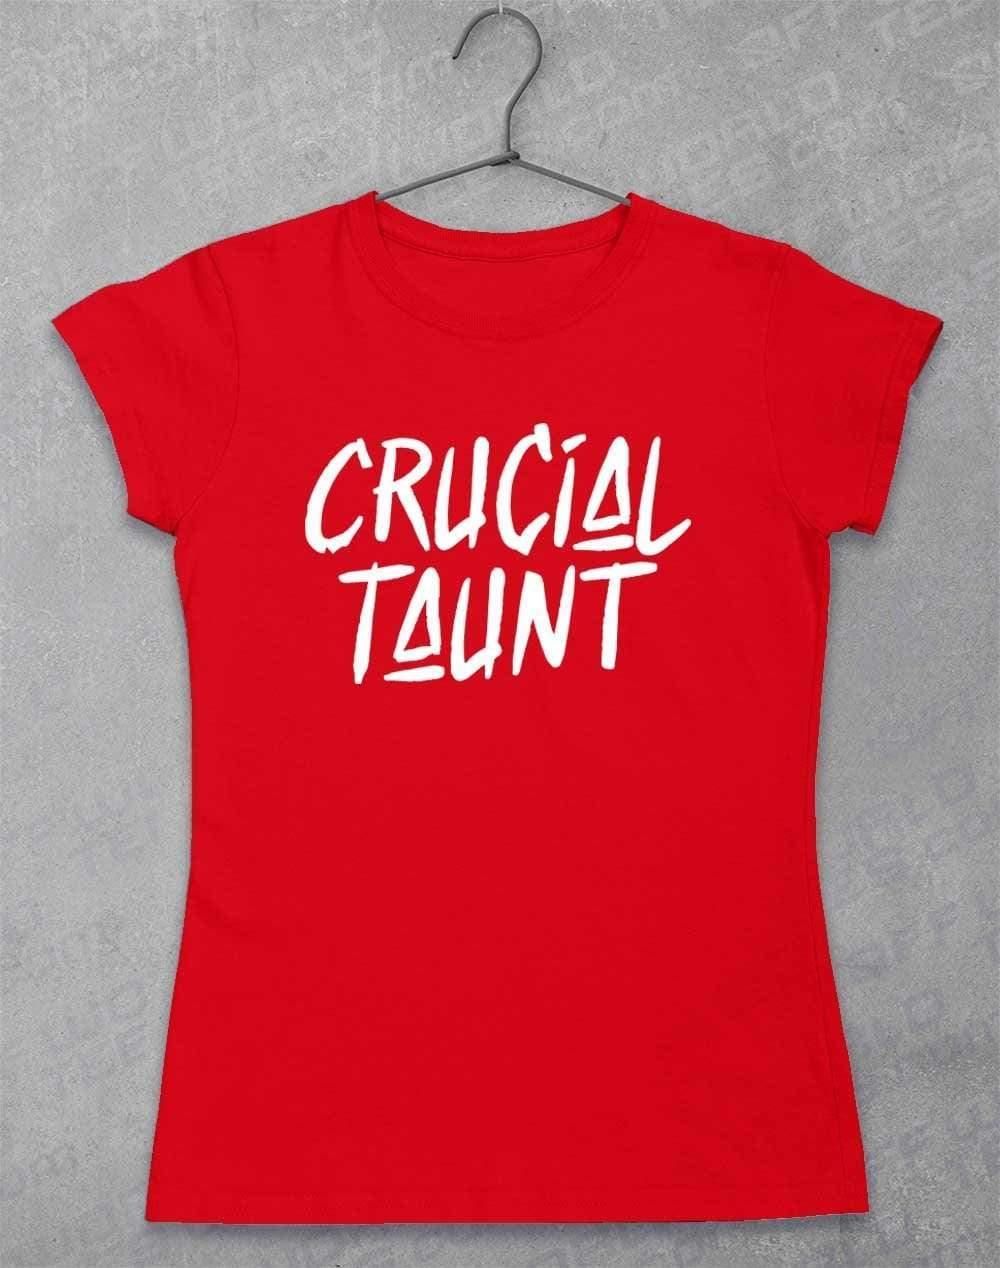 Crucial Taunt Womens T-Shirt 8-10 / Red  - Off World Tees